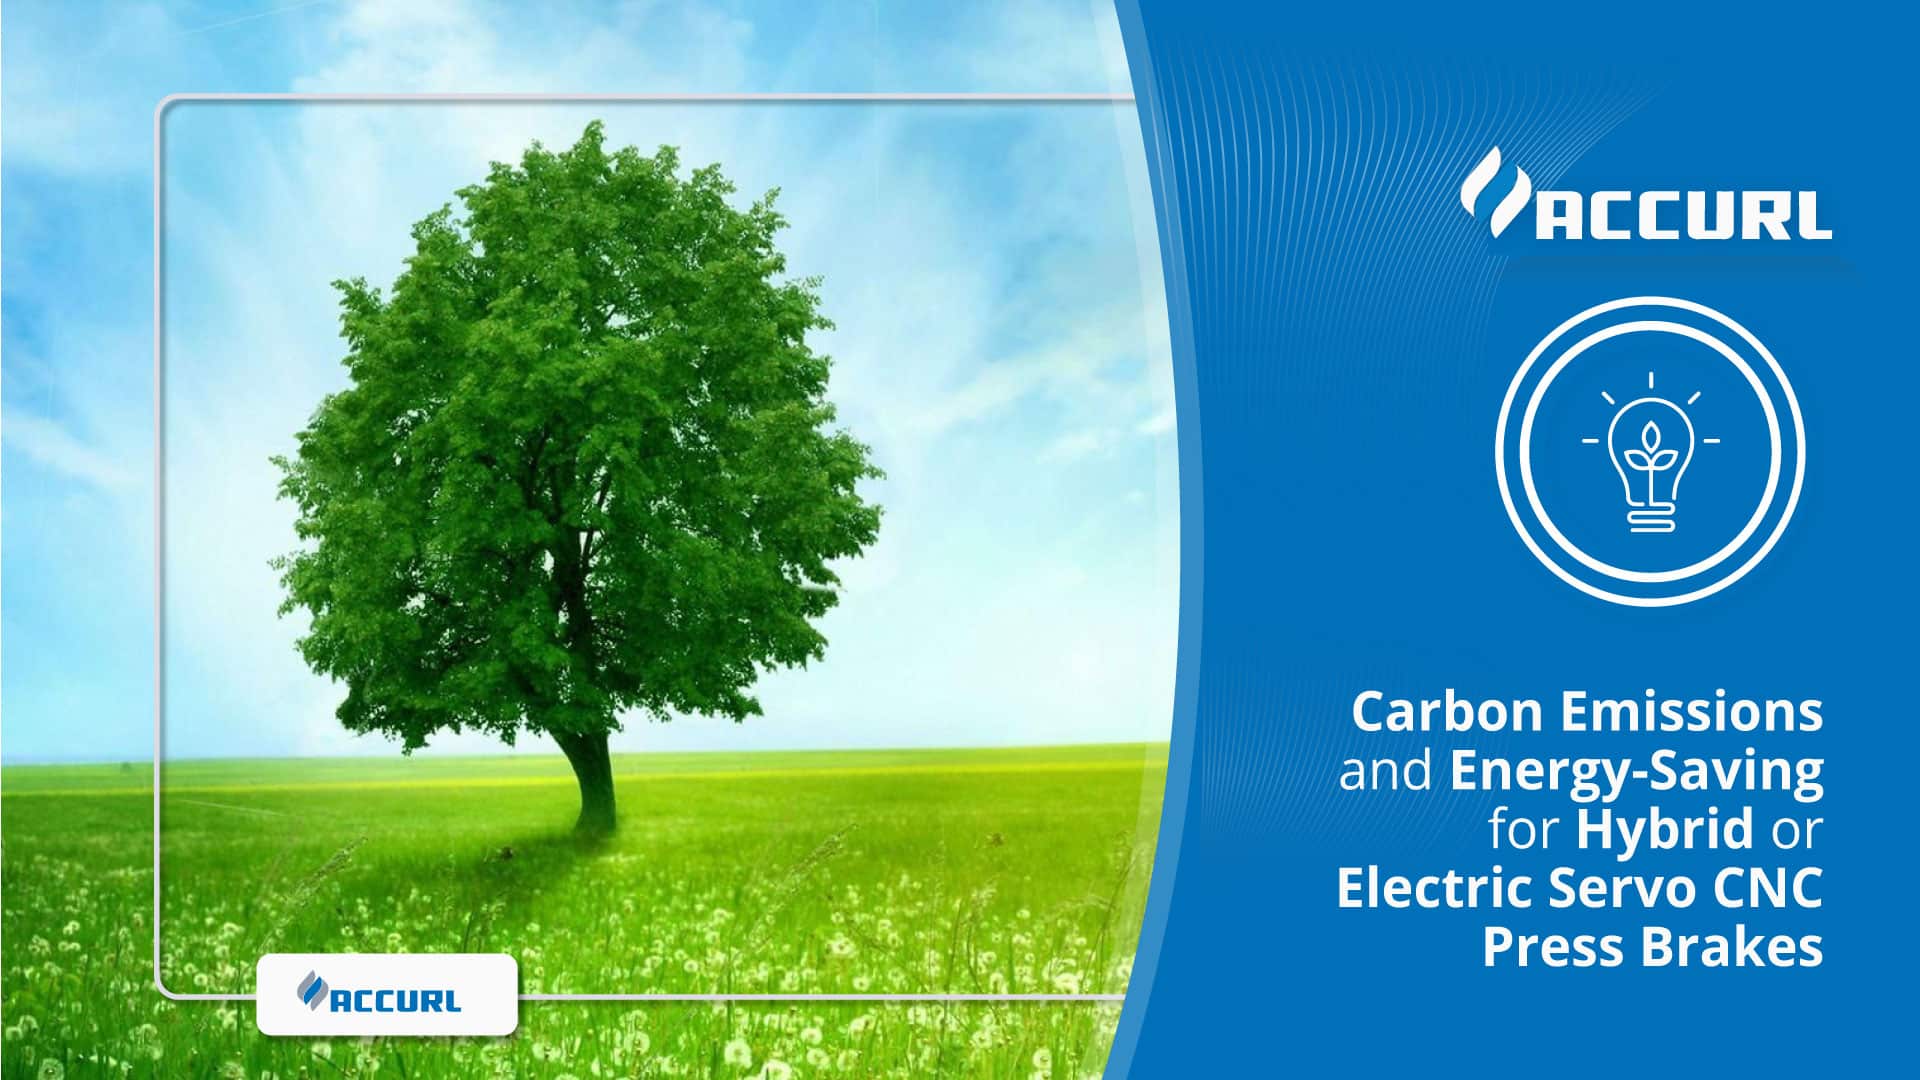 Carbon Emissions and Energy-Saving for Hybrid or Electric Servo CNC Press Brakes